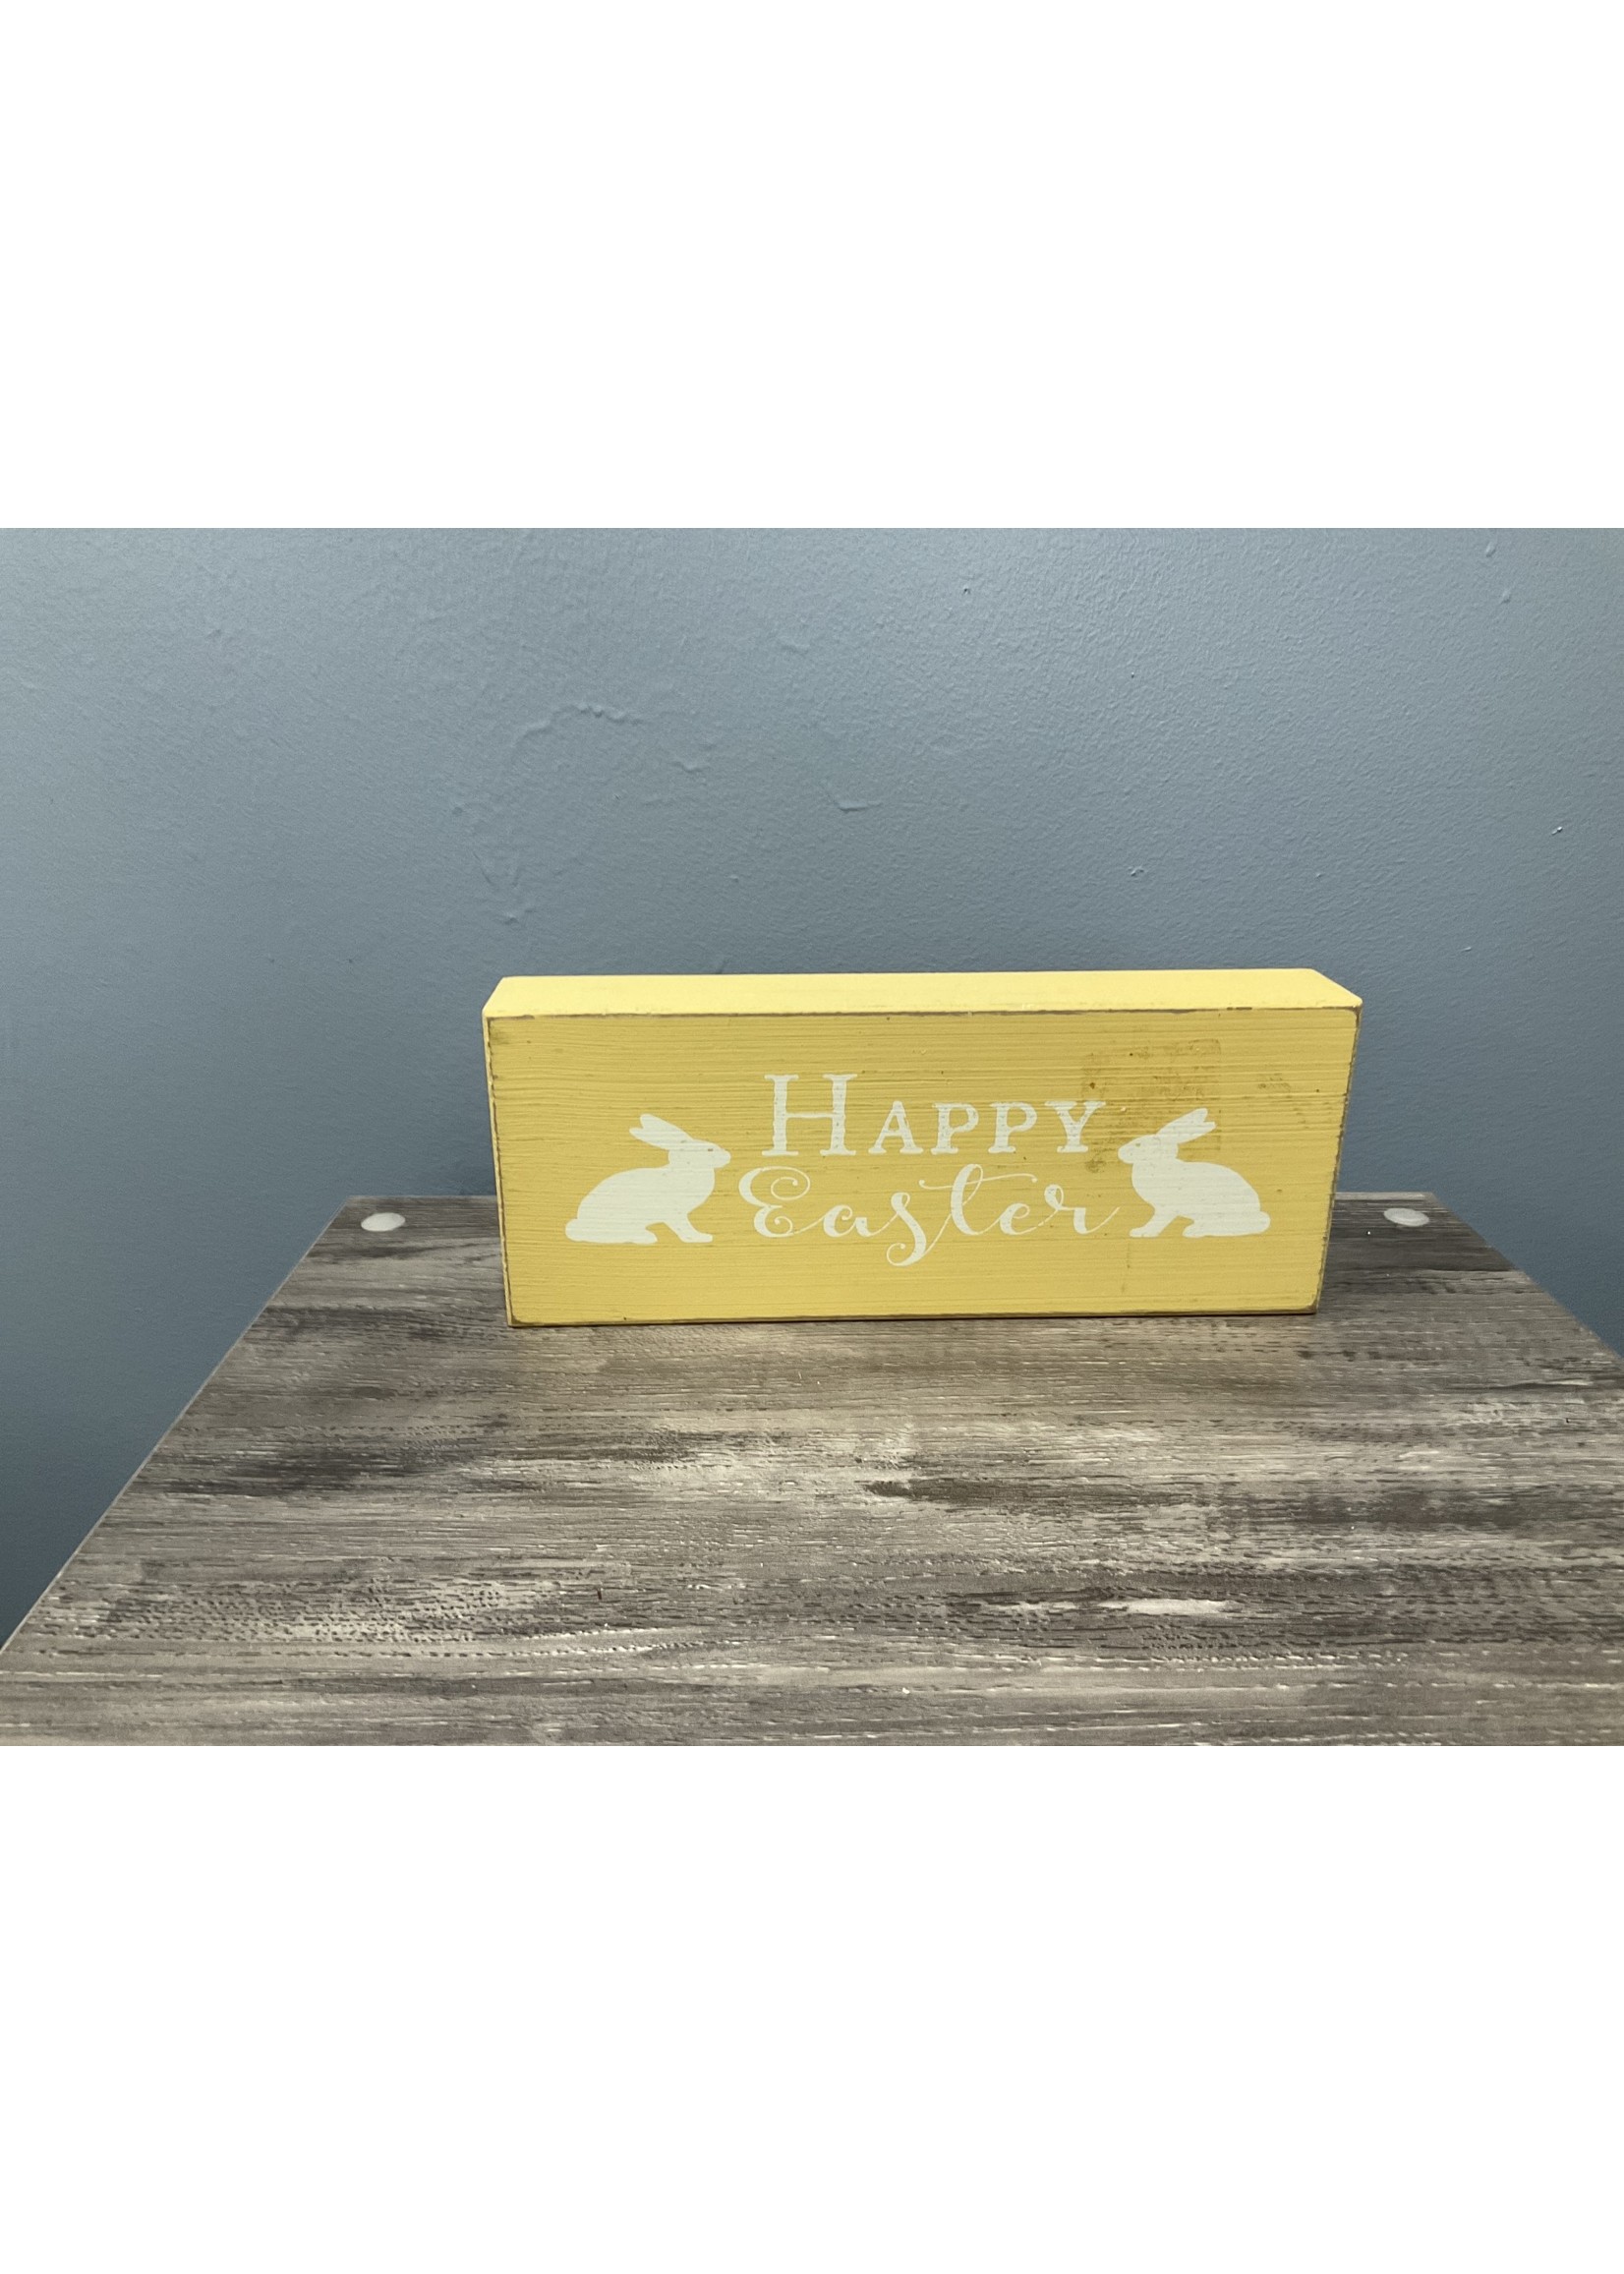 My New Favorite Thing 476 Sign 10x4-Yellow "Happy Easter" w/2 White Bunnies